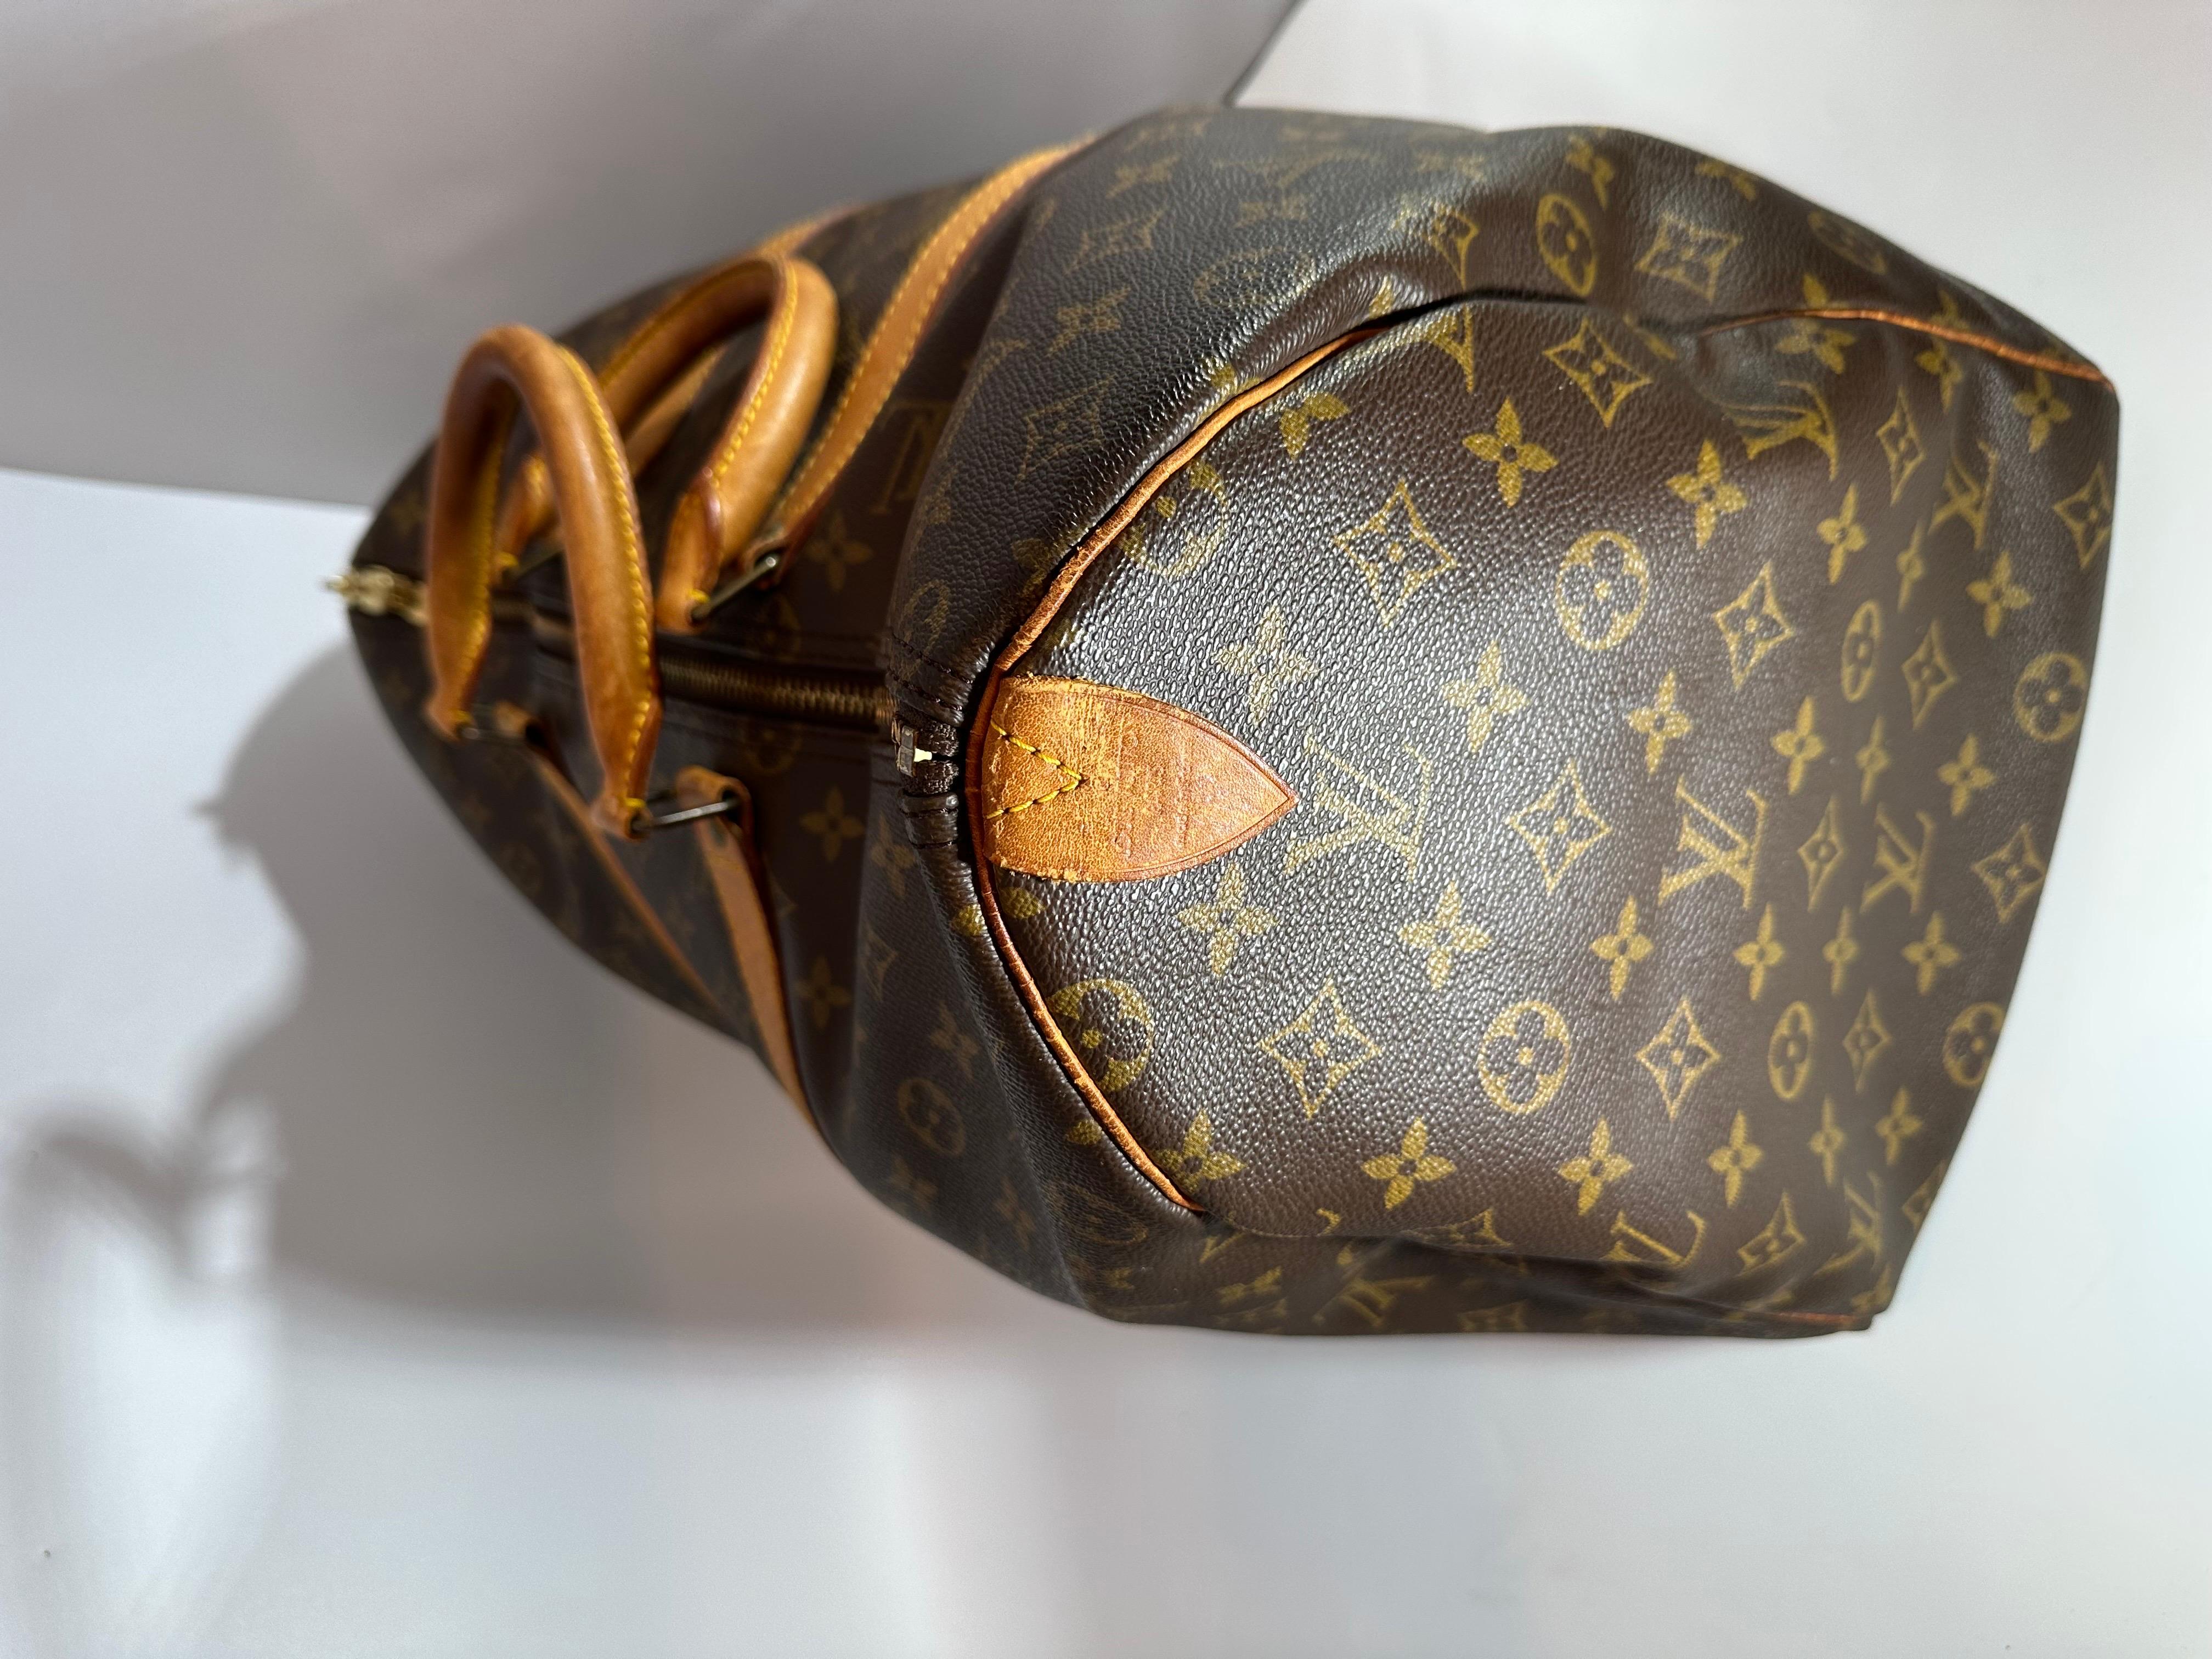 A Louis Vuitton logo-printed Louis Vuitton Keepall 50 with leather trim with bring a touch of heritage luxury wherever you carry it.
Over all  good condition,
I have added lots of pictures of the original bag so please take a look at ball the